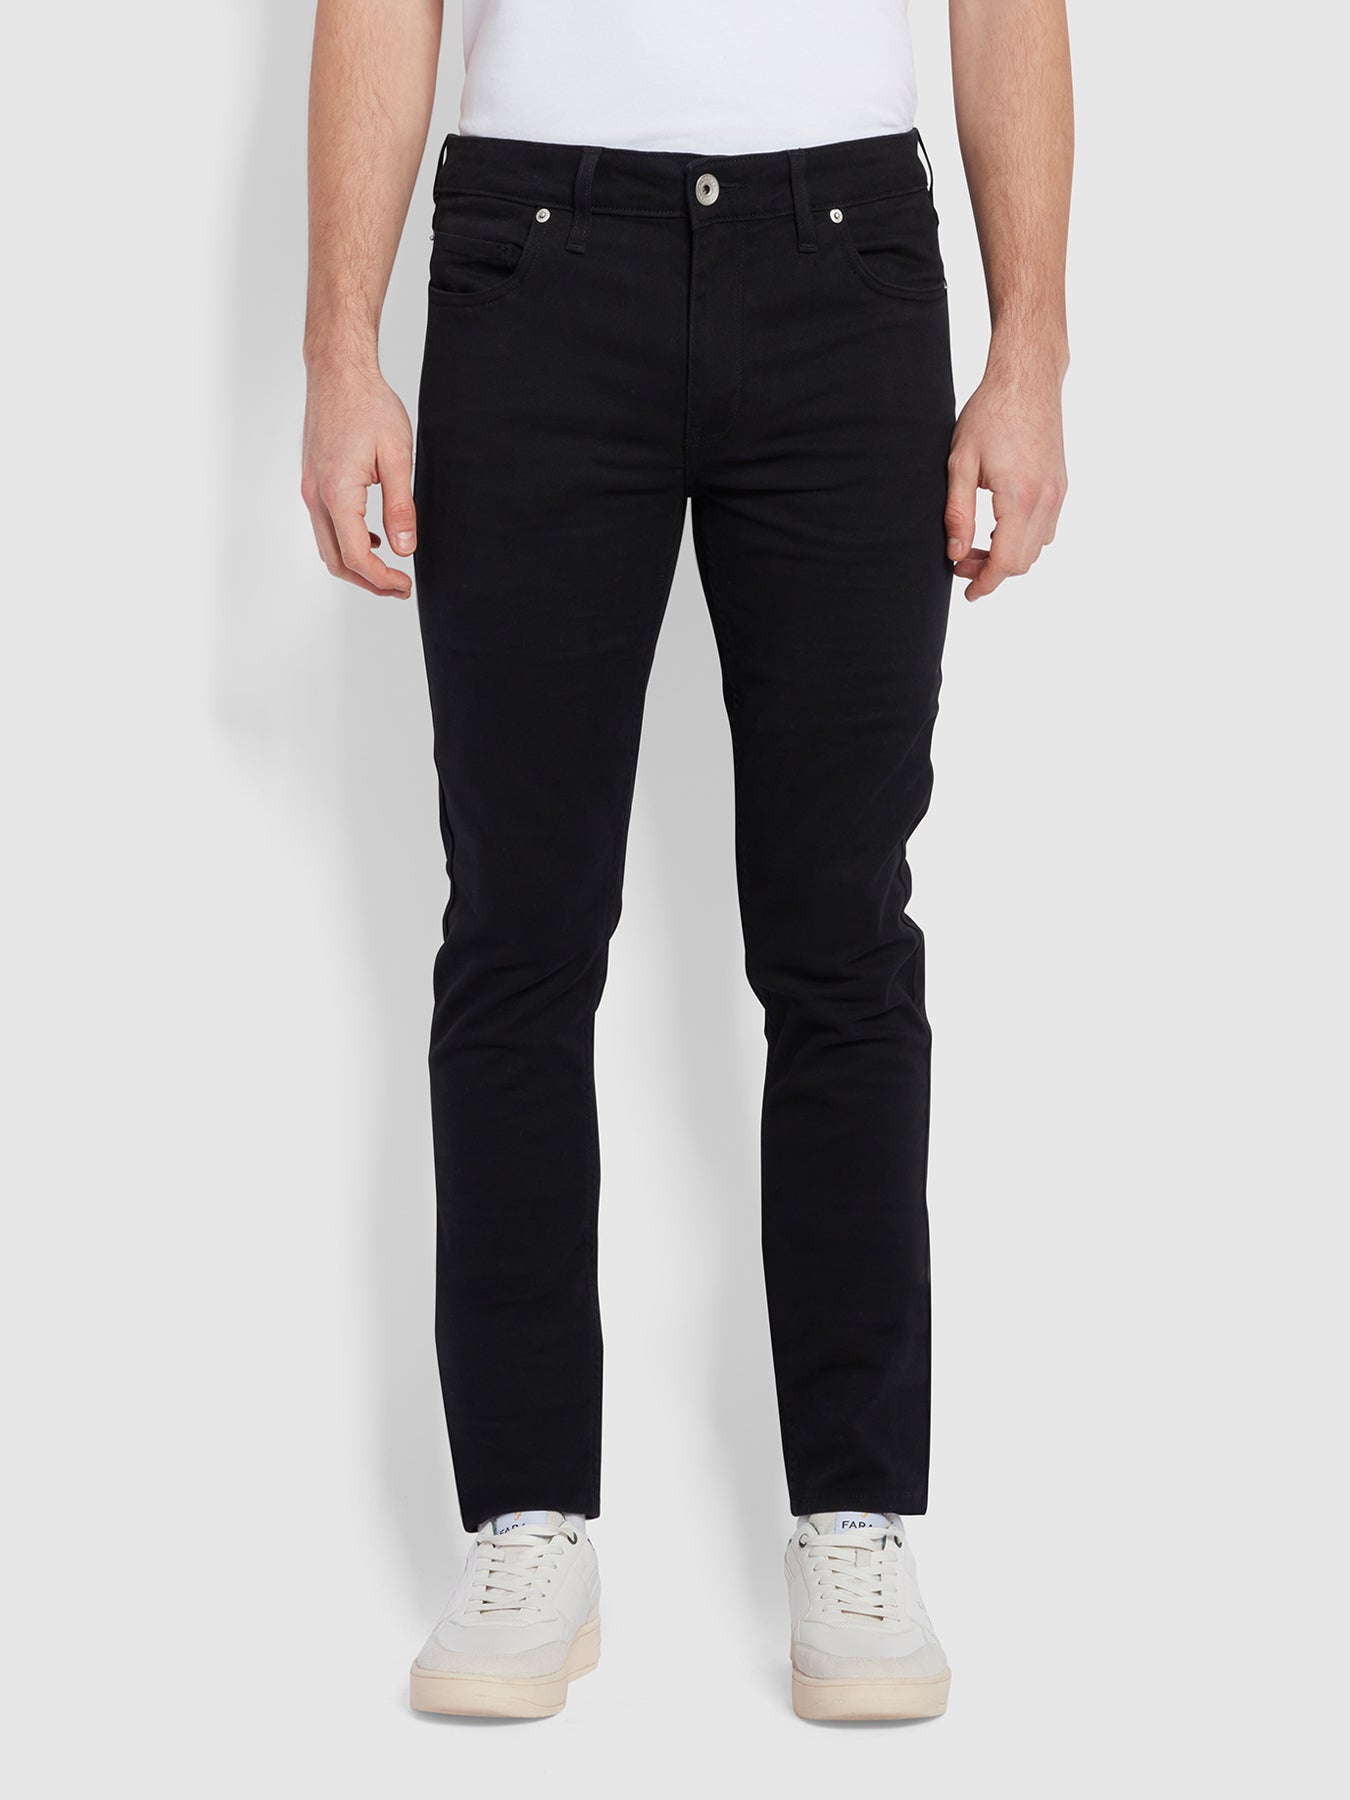 View Drake Slim Fit Cotton Twill Trousers In Black information